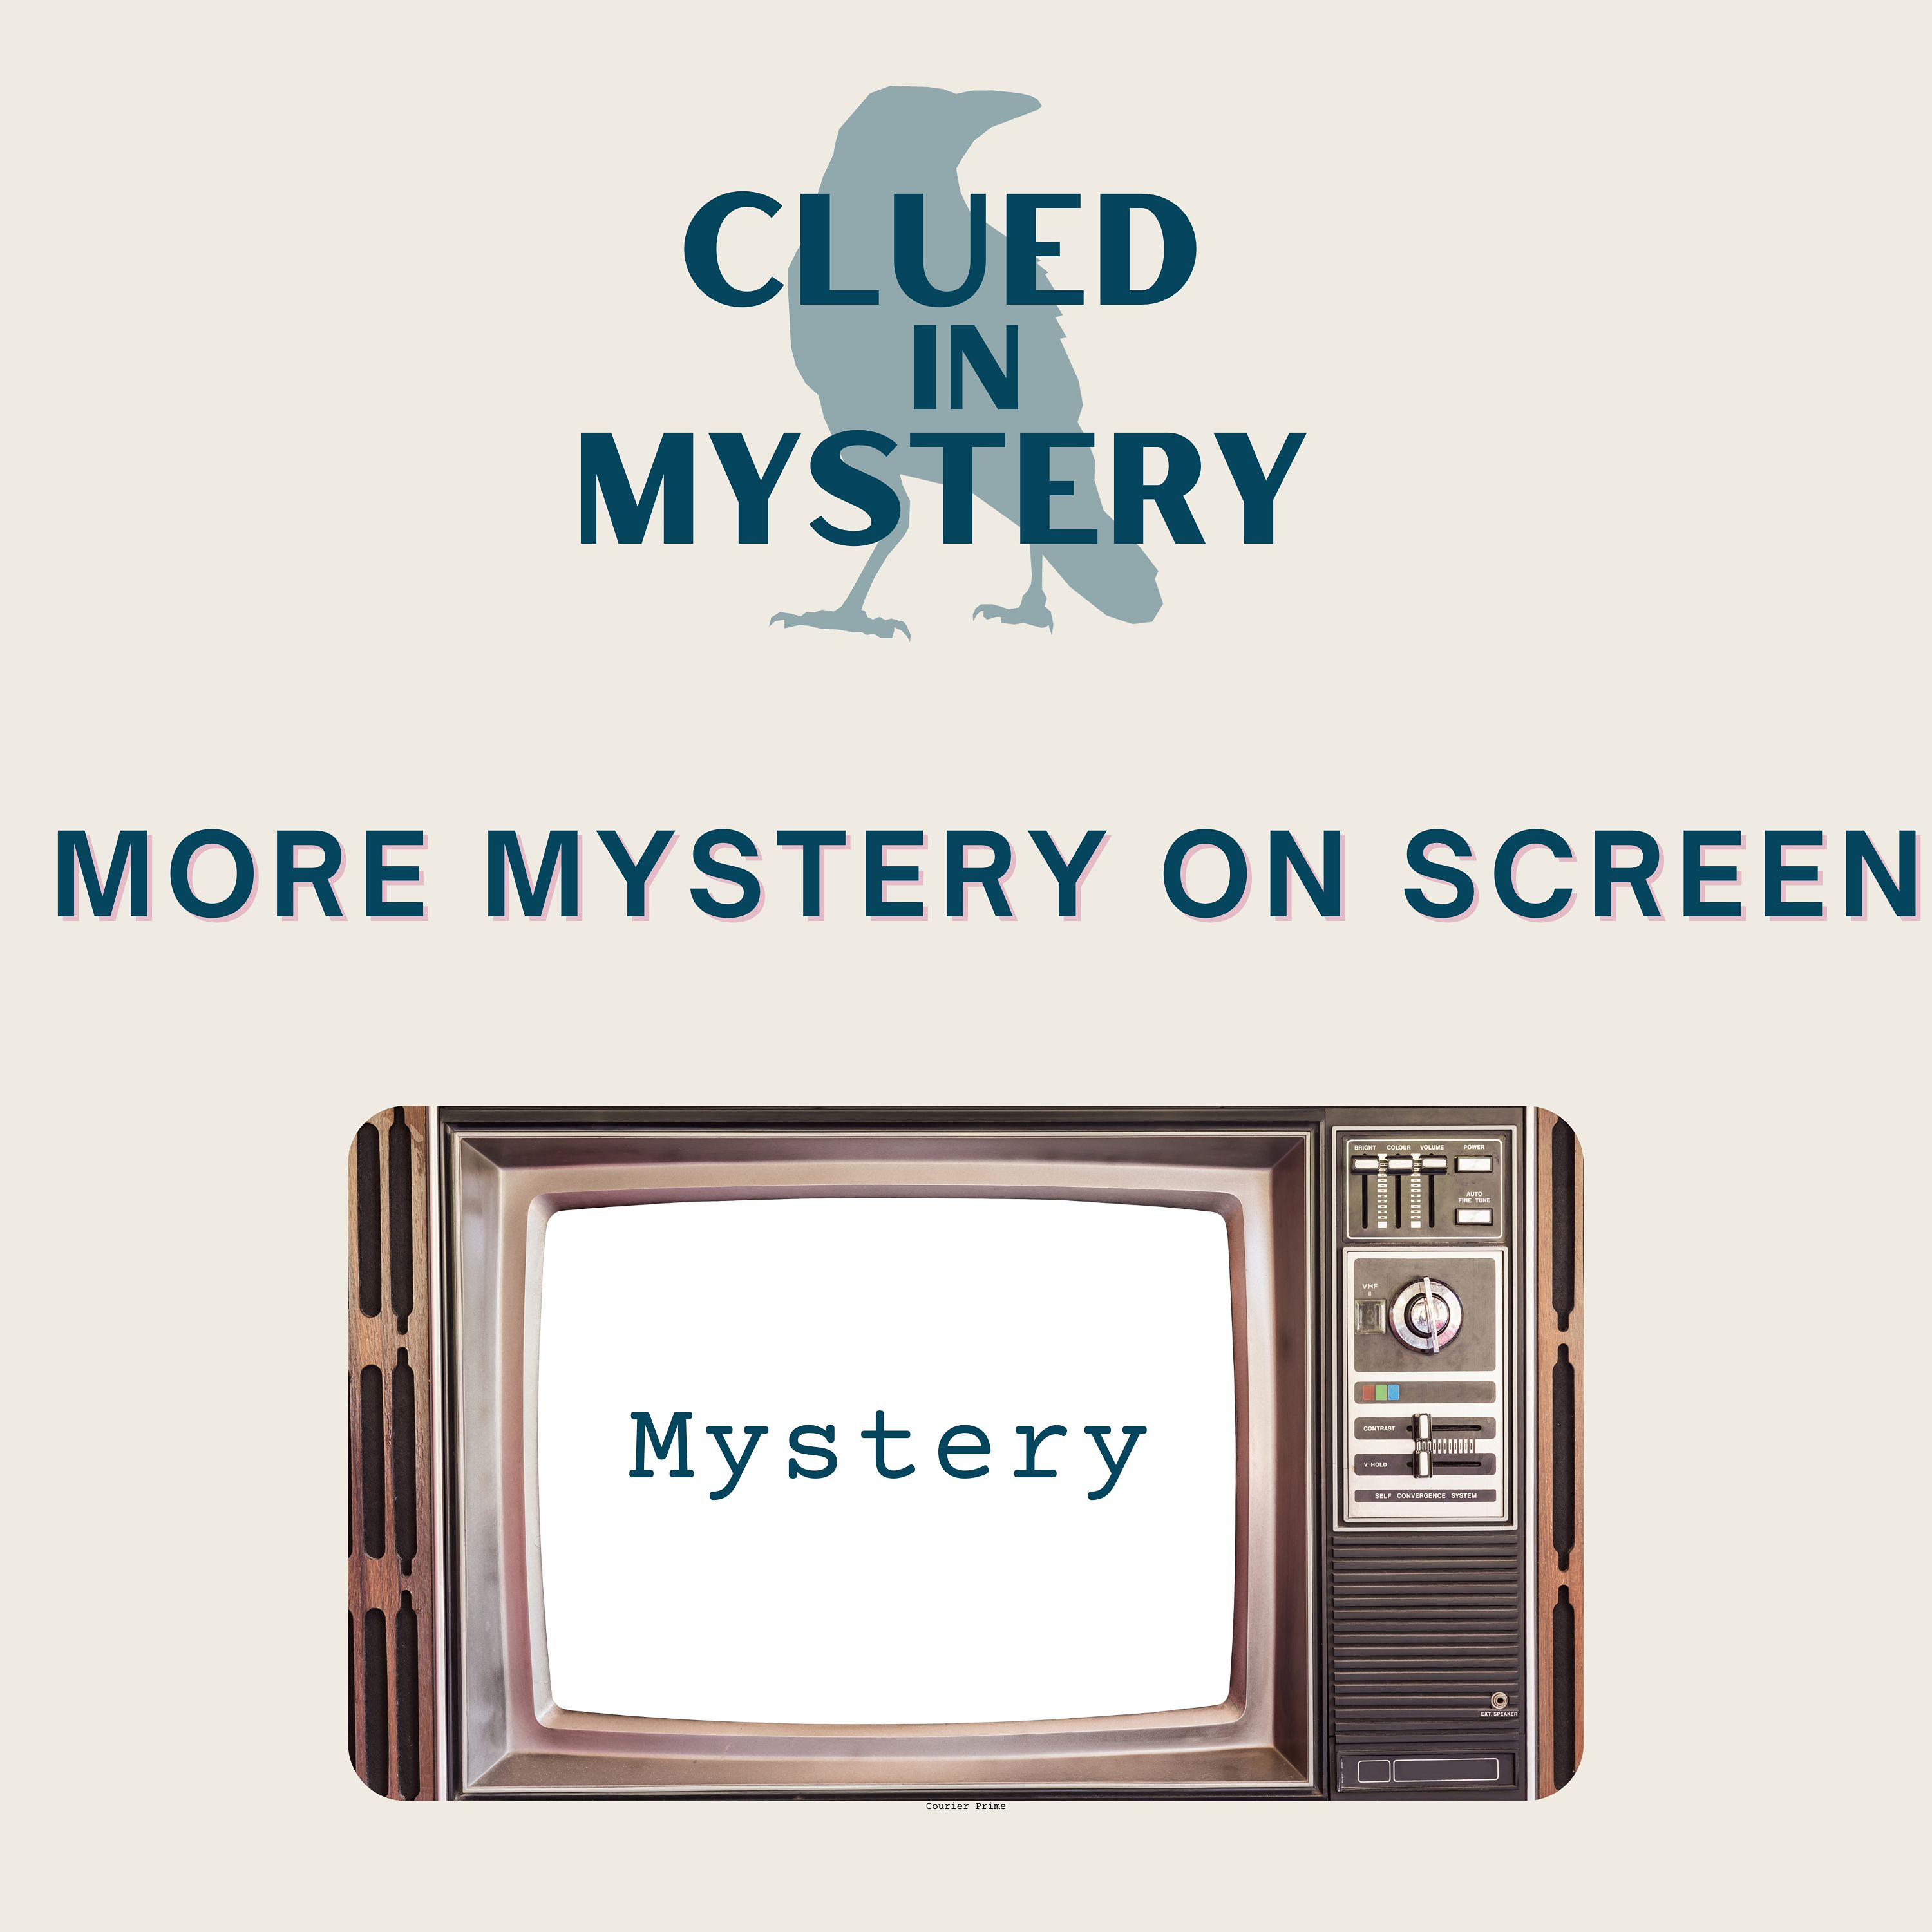 More Mysteries on Screen